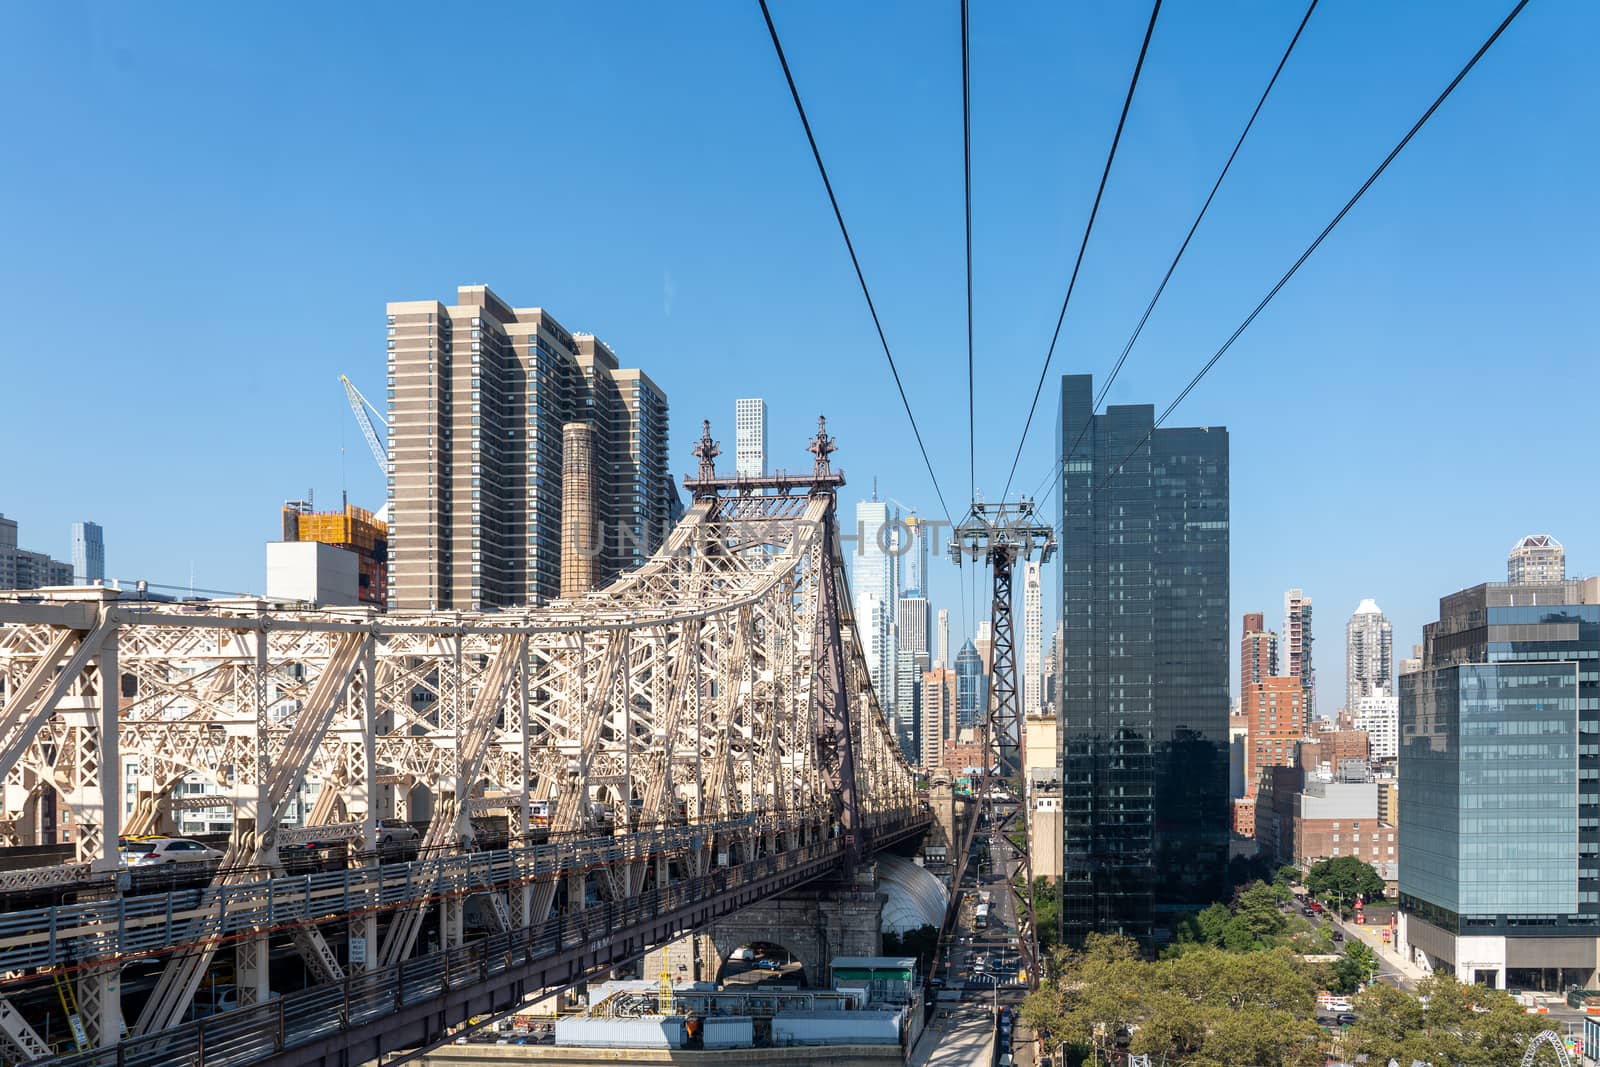 NYC, USA - September 23, 2019: The Queensboro Bridge and the tramway from Midtown Manhattan to Roosevelt Island.